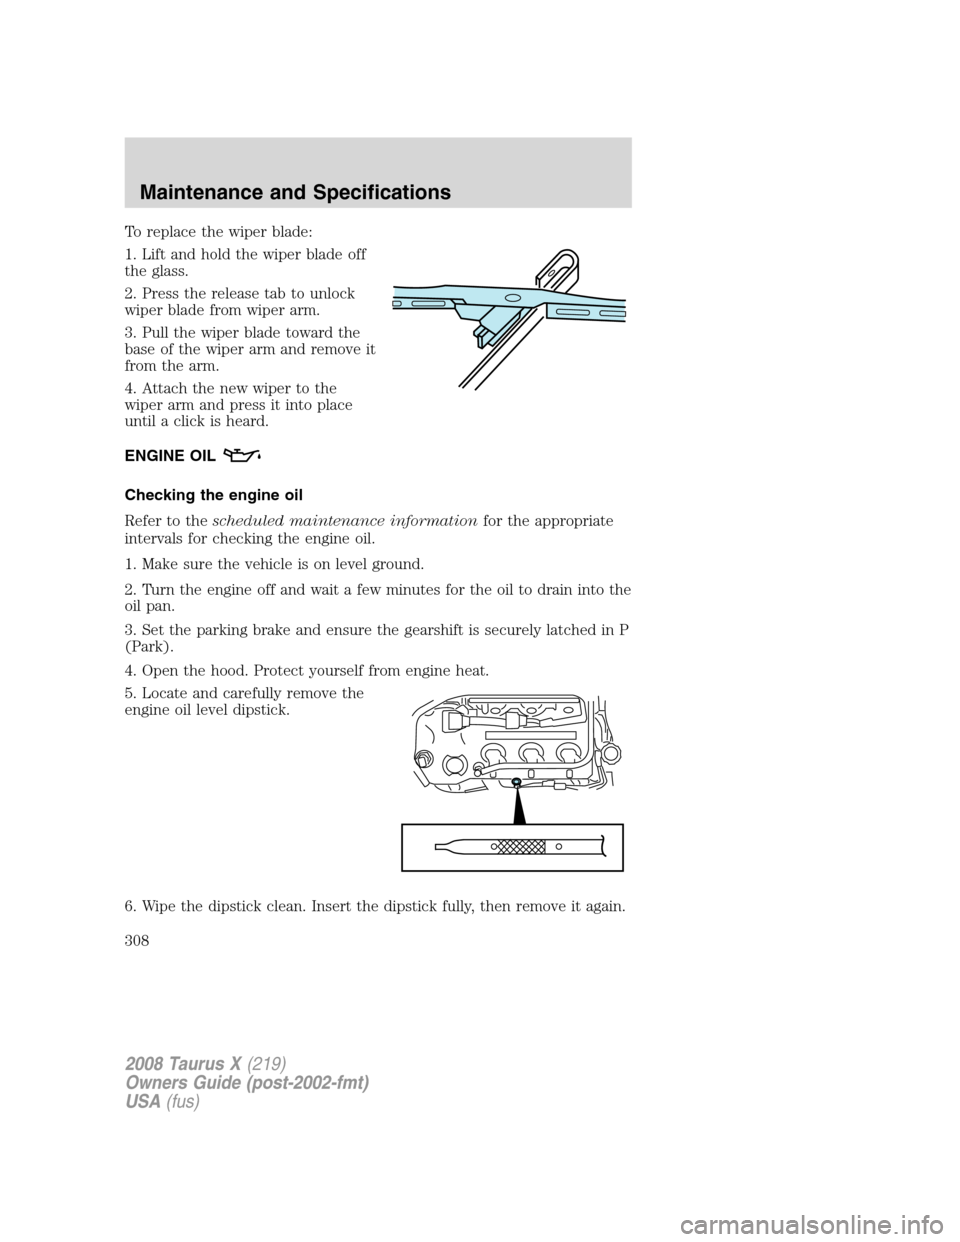 FORD TAURUS X 2008 1.G Owners Manual To replace the wiper blade:
1. Lift and hold the wiper blade off
the glass.
2. Press the release tab to unlock
wiper blade from wiper arm.
3. Pull the wiper blade toward the
base of the wiper arm and 